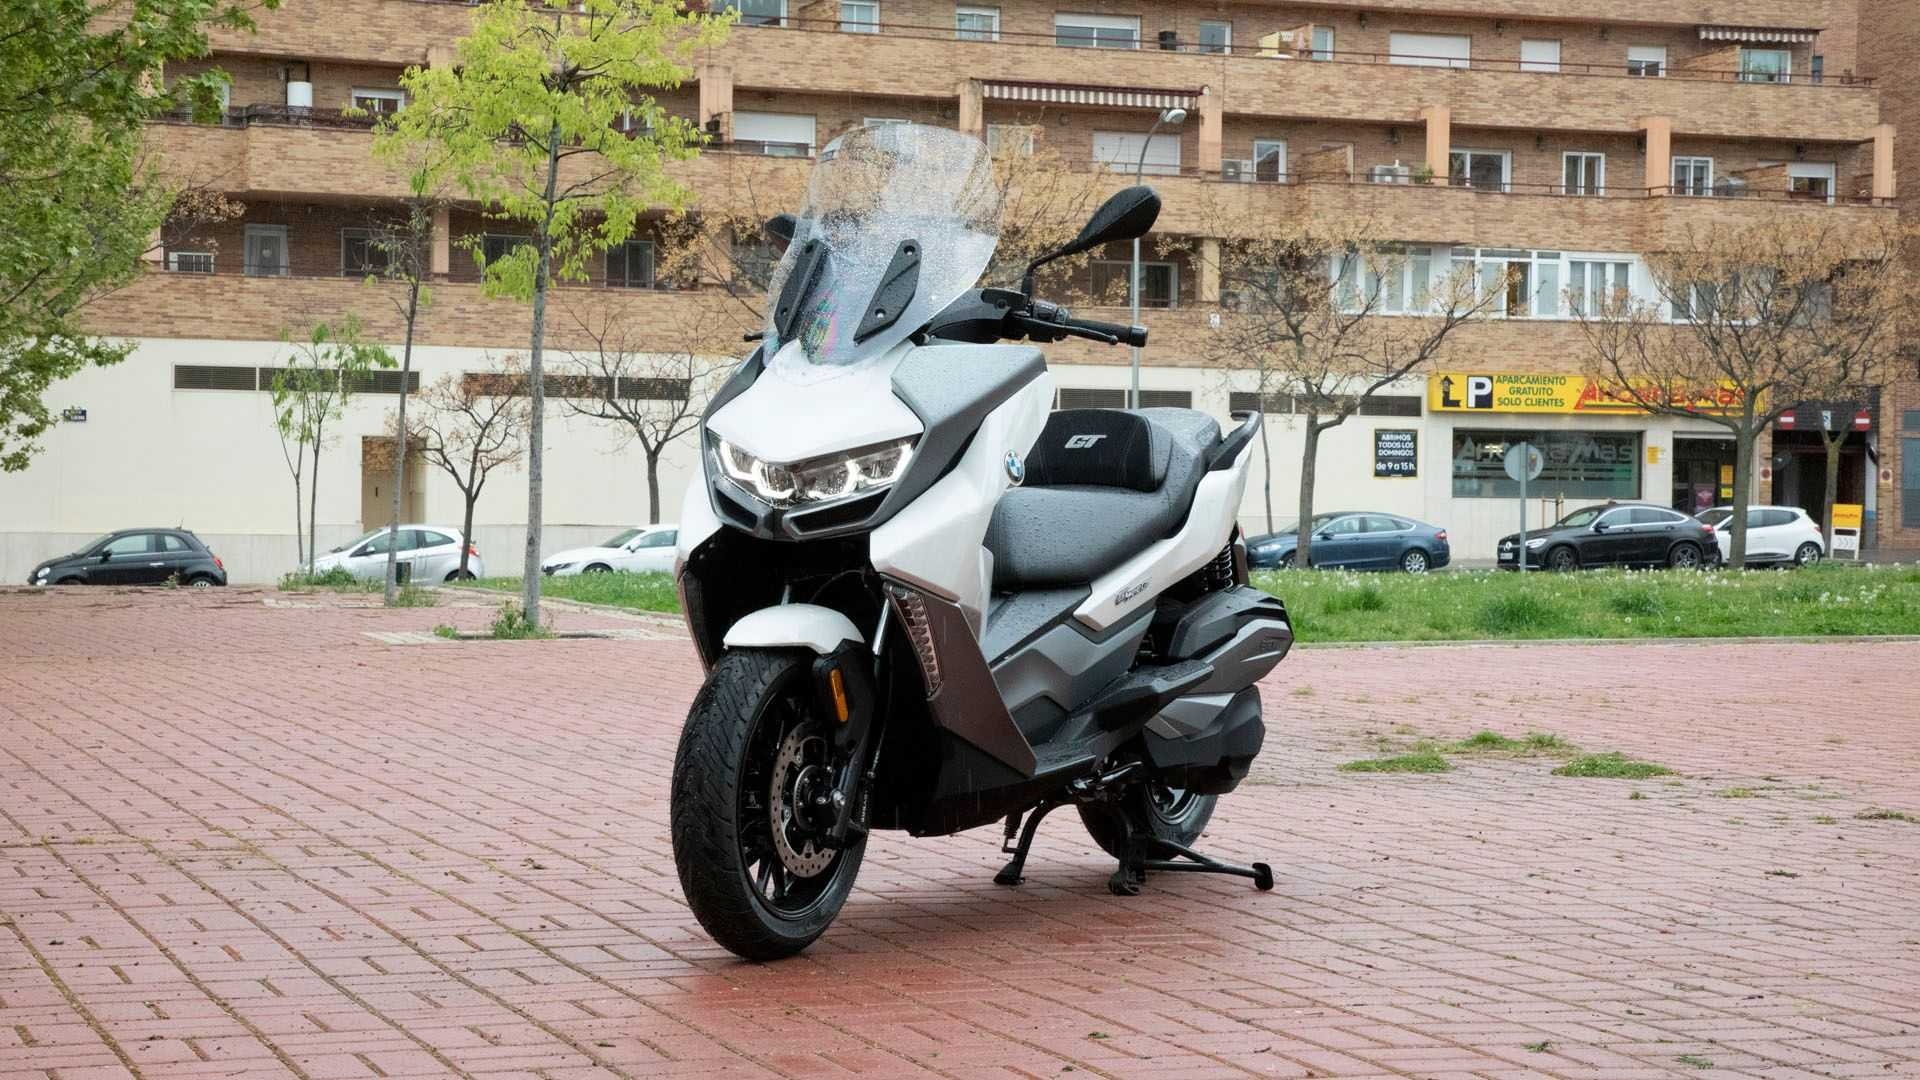 BMW C 400 GT, Maxi scooter of choice, Perfect for daily commute, Diariomotor recommendation, 1920x1080 Full HD Desktop